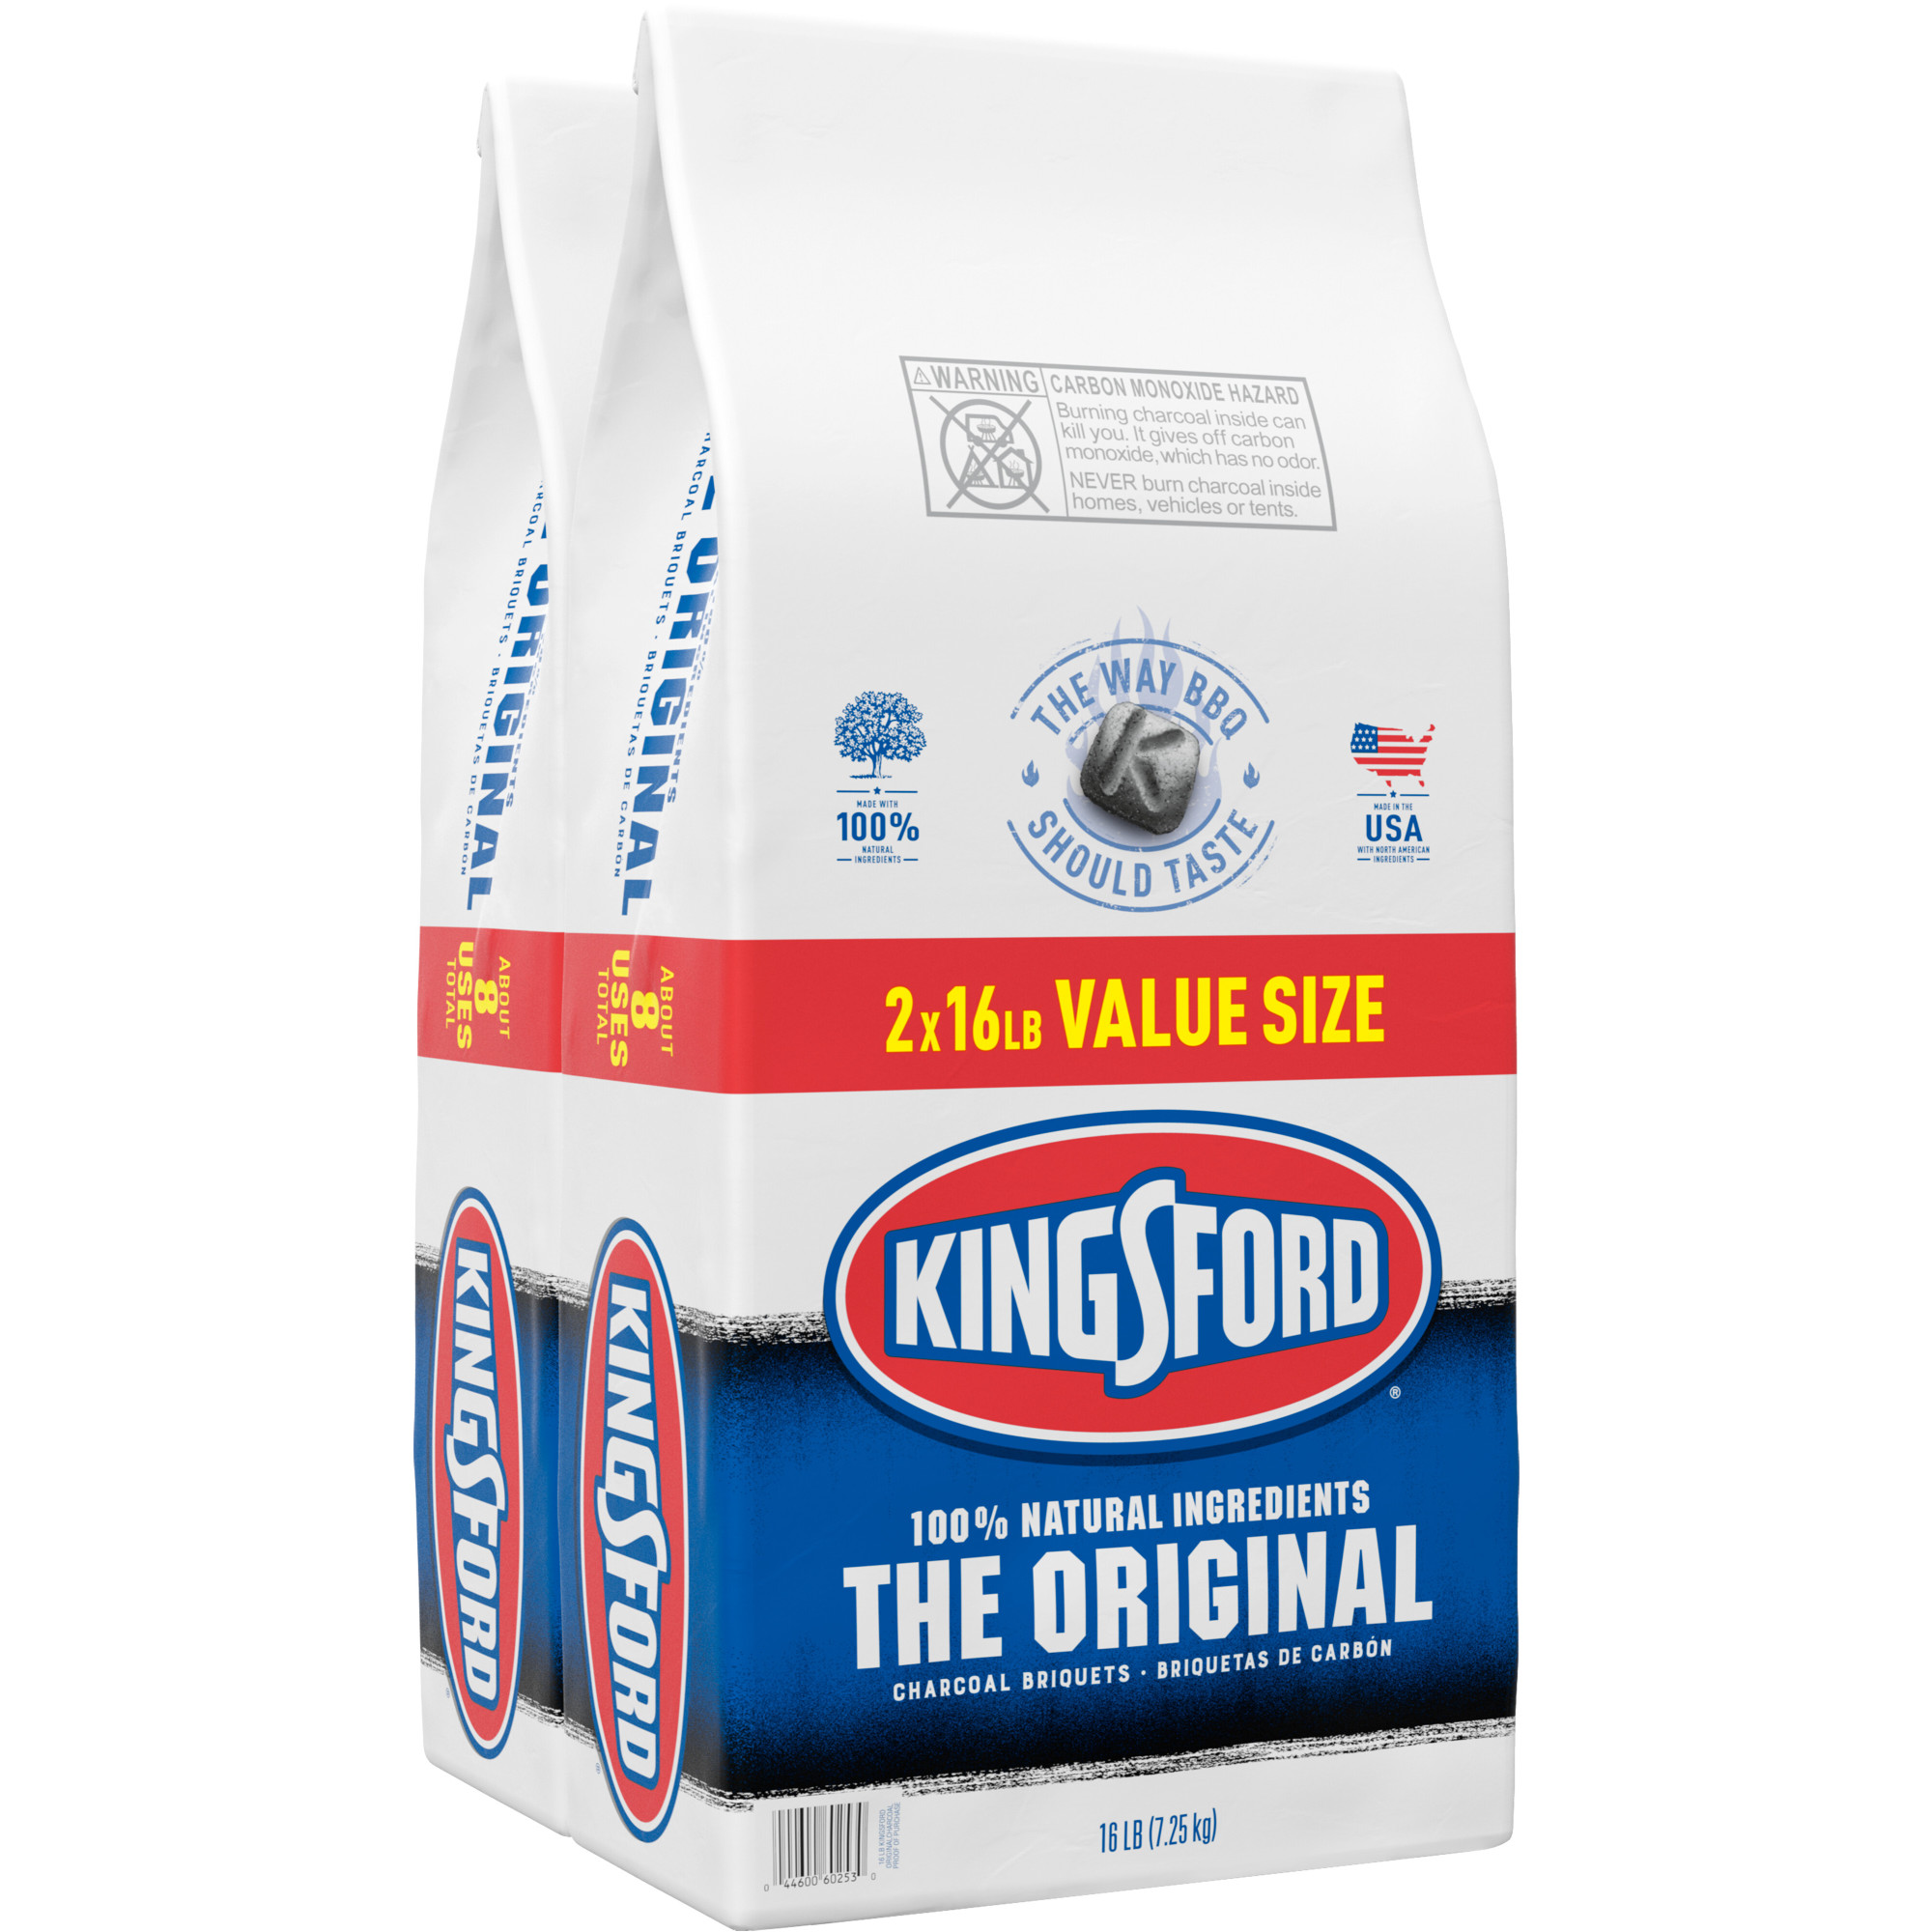 Kingsford Original Charcoal Briquettes, 16 lbs, 2 Pack - image 1 of 9